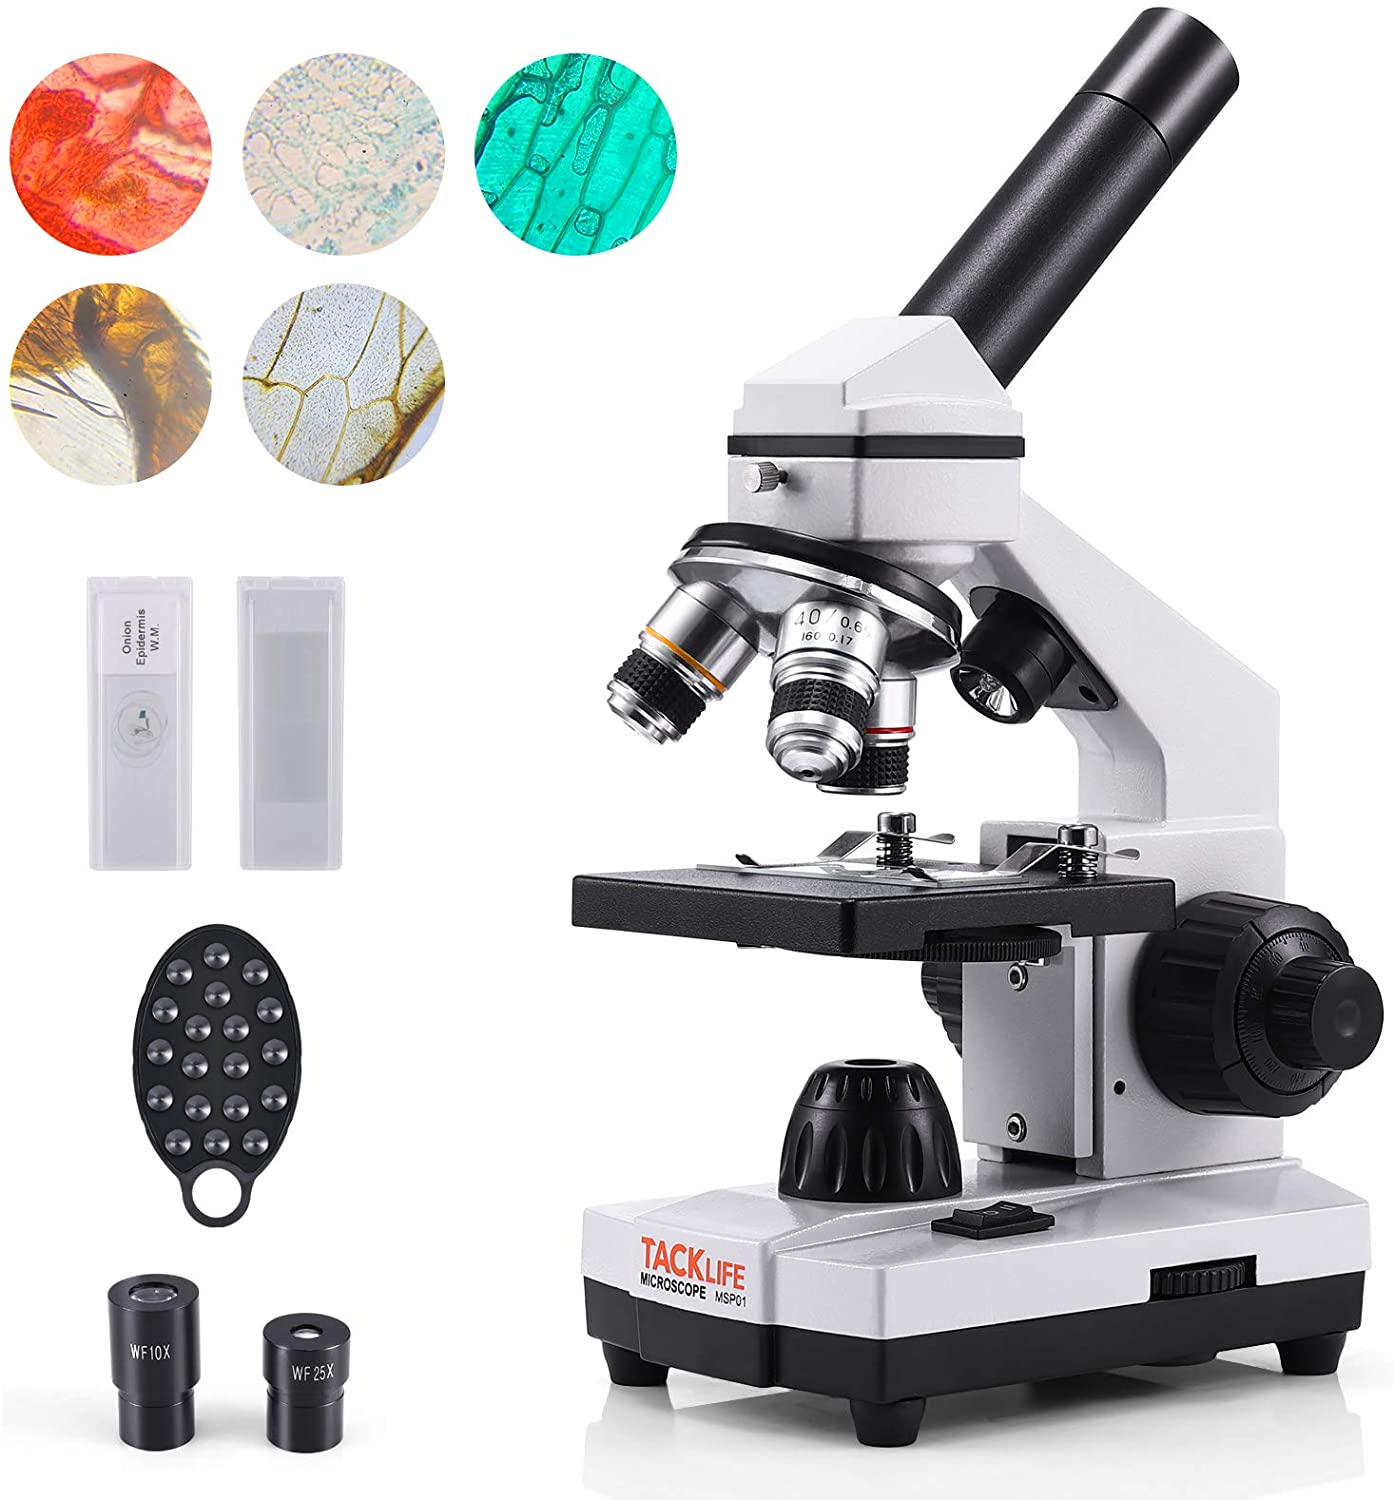 TACKLIFE 40X-1000X Microscope, Double LED Illumination/Dual Power source, School Lab Monocular Microscope with Wide-Field 10X &25X Eyepieces,10 Slides, Cellphone Adapter, for Kid/Student, Adult- MSP01